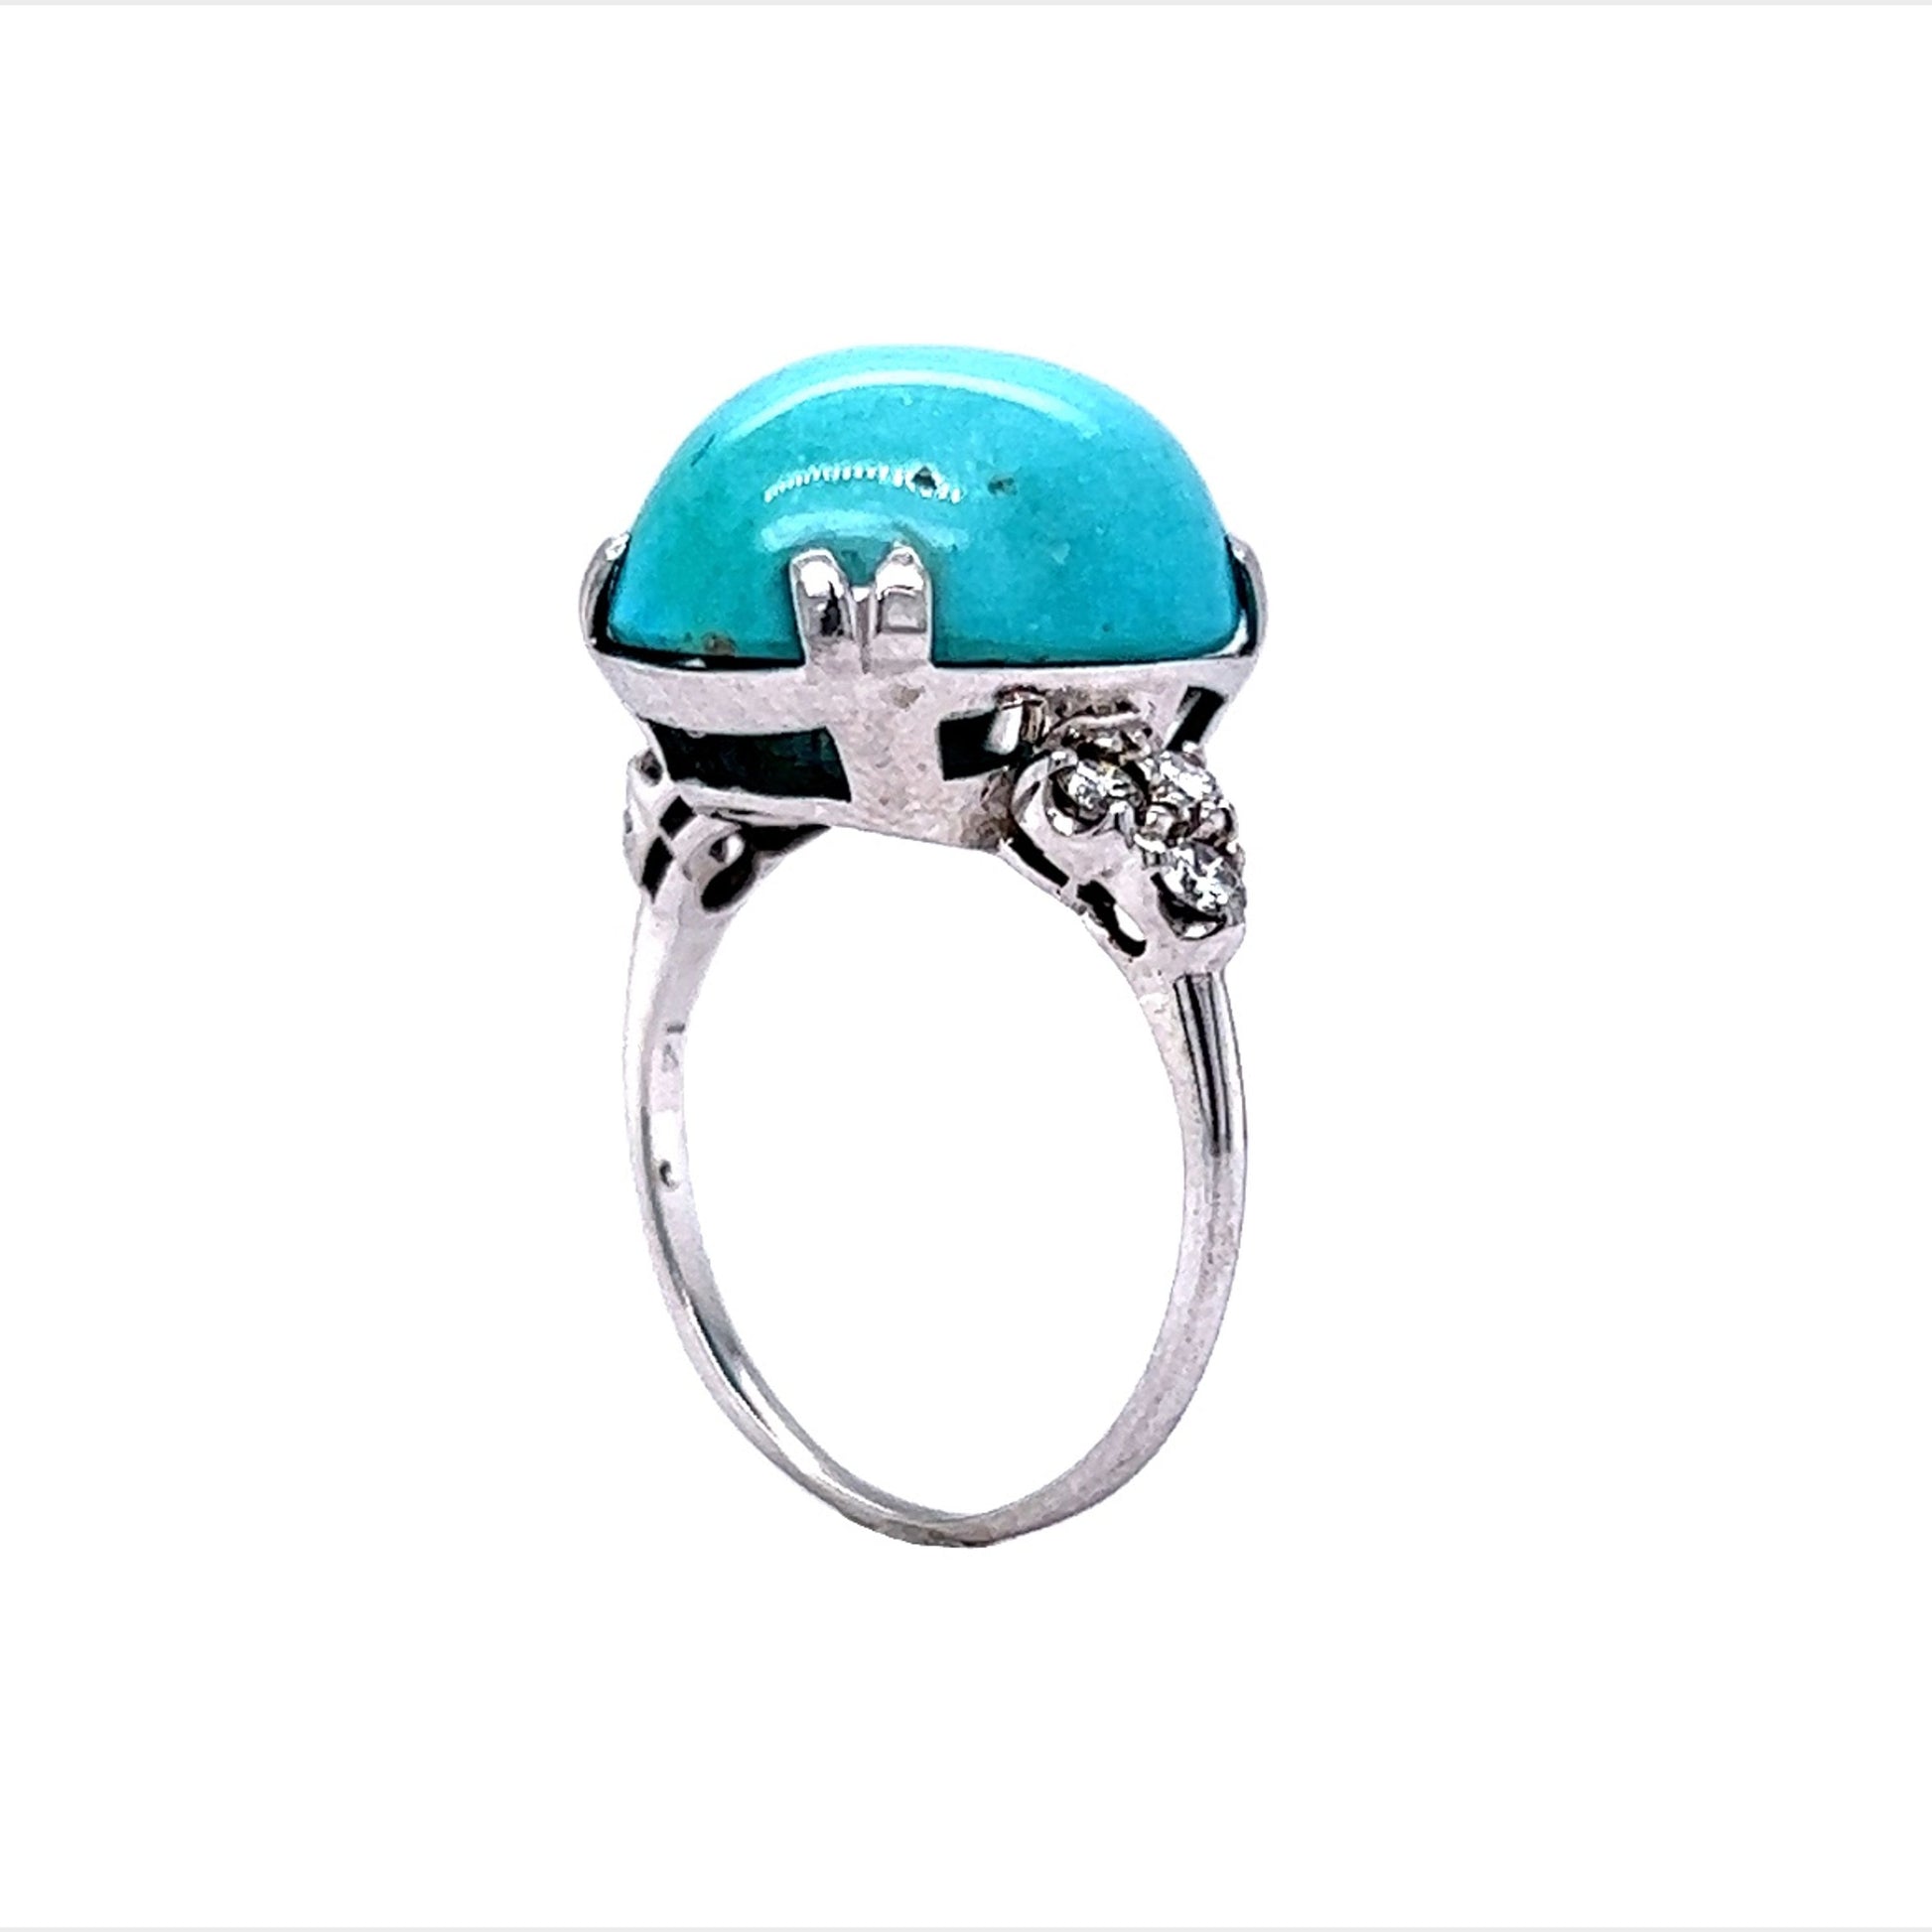 Cabochon Turquoise Cocktail Ring in 14k White Gold